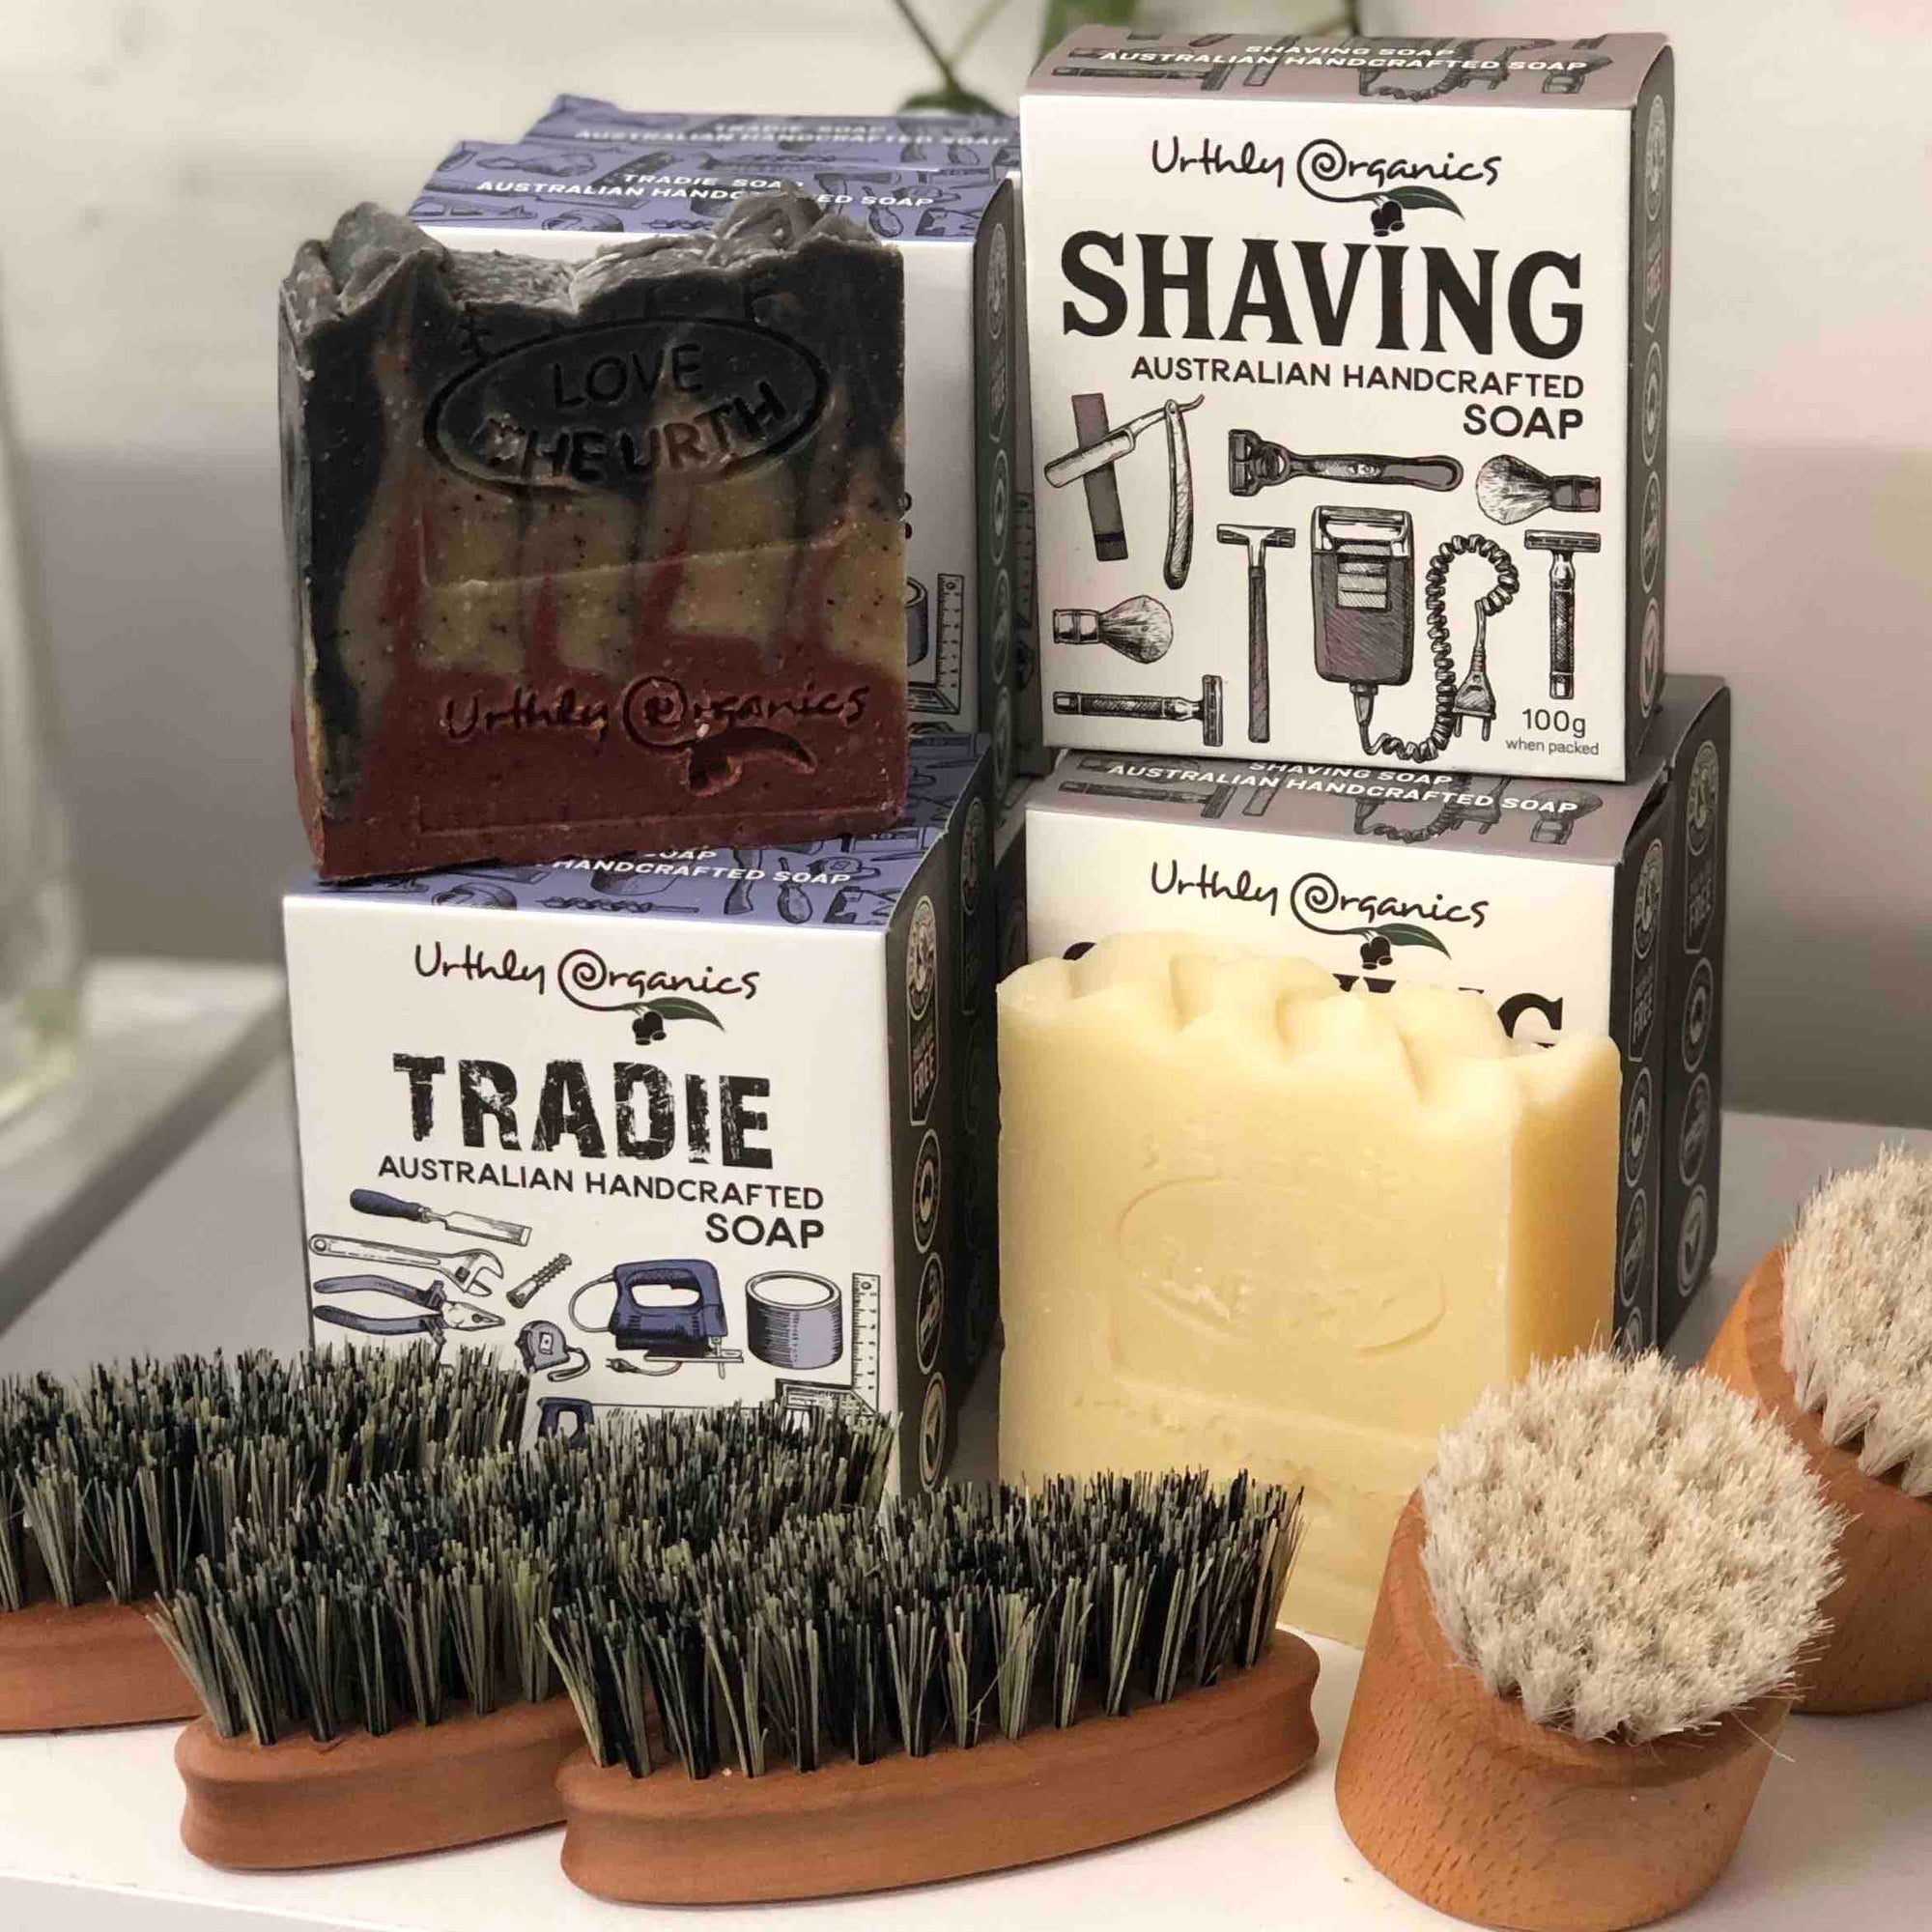 Bars of tradie soap and shaving soap behind beard brushes